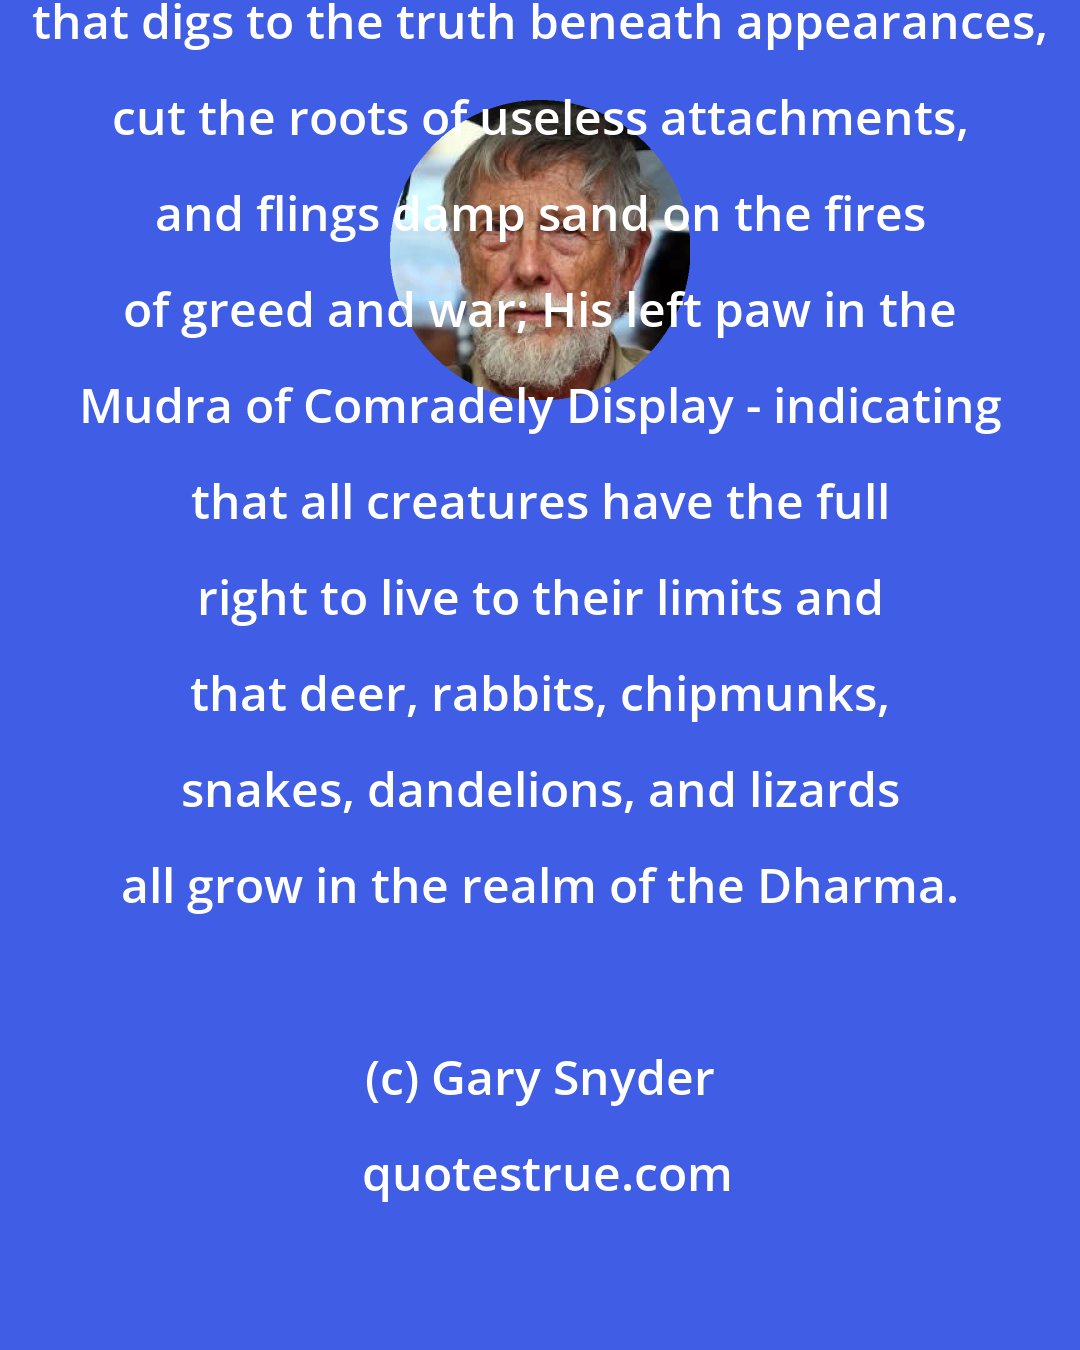 Gary Snyder: Bearing in his right paw the shovel that digs to the truth beneath appearances, cut the roots of useless attachments, and flings damp sand on the fires of greed and war; His left paw in the Mudra of Comradely Display - indicating that all creatures have the full right to live to their limits and that deer, rabbits, chipmunks, snakes, dandelions, and lizards all grow in the realm of the Dharma.